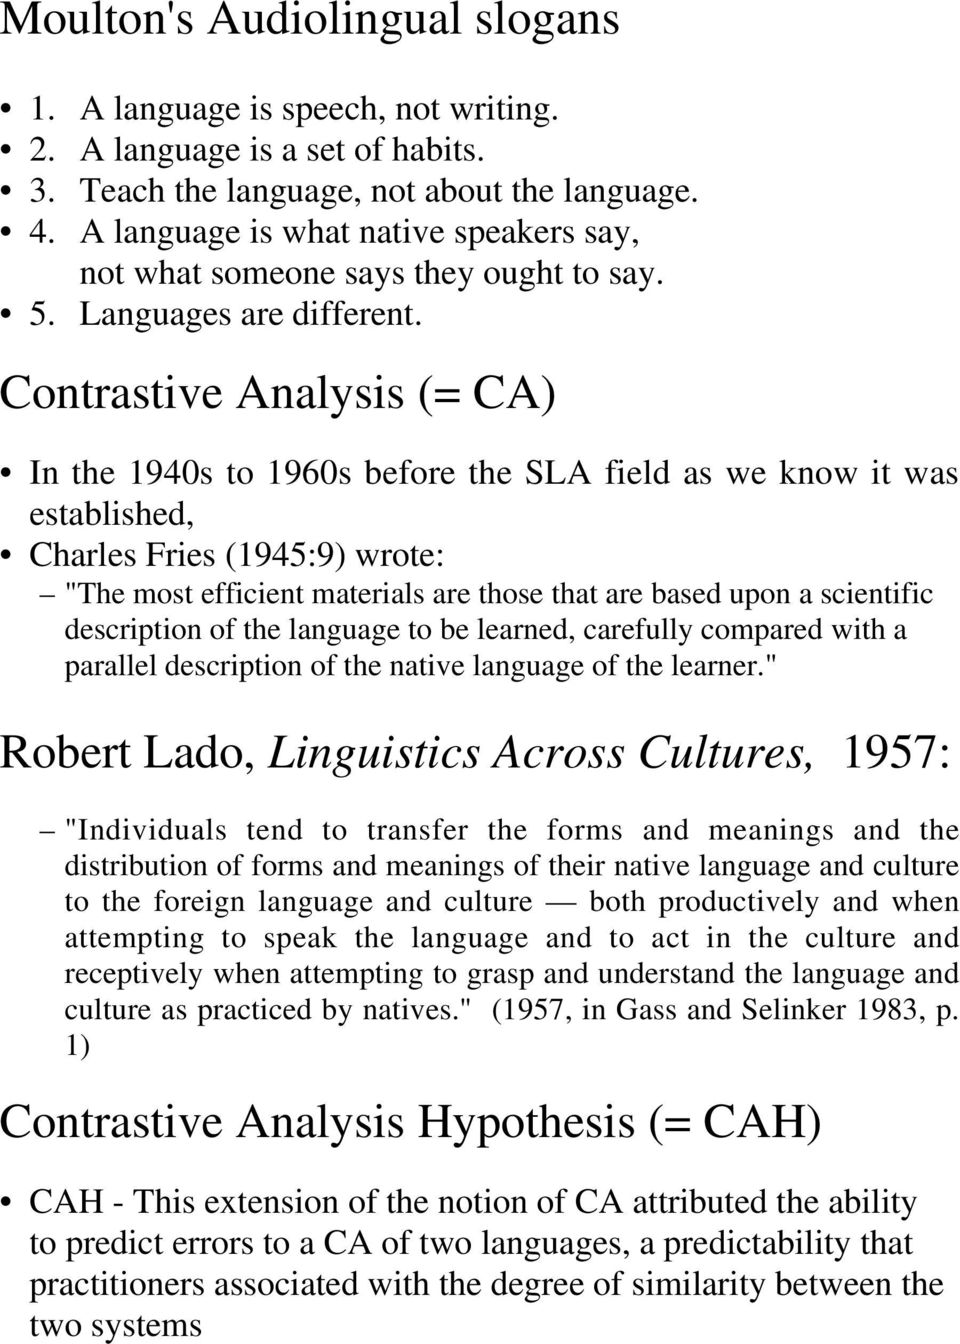 Contrastive Analysis (= CA) In the 1940s to 1960s before the SLA field as we know it was established, Charles Fries (1945:9) wrote: "The most efficient materials are those that are based upon a